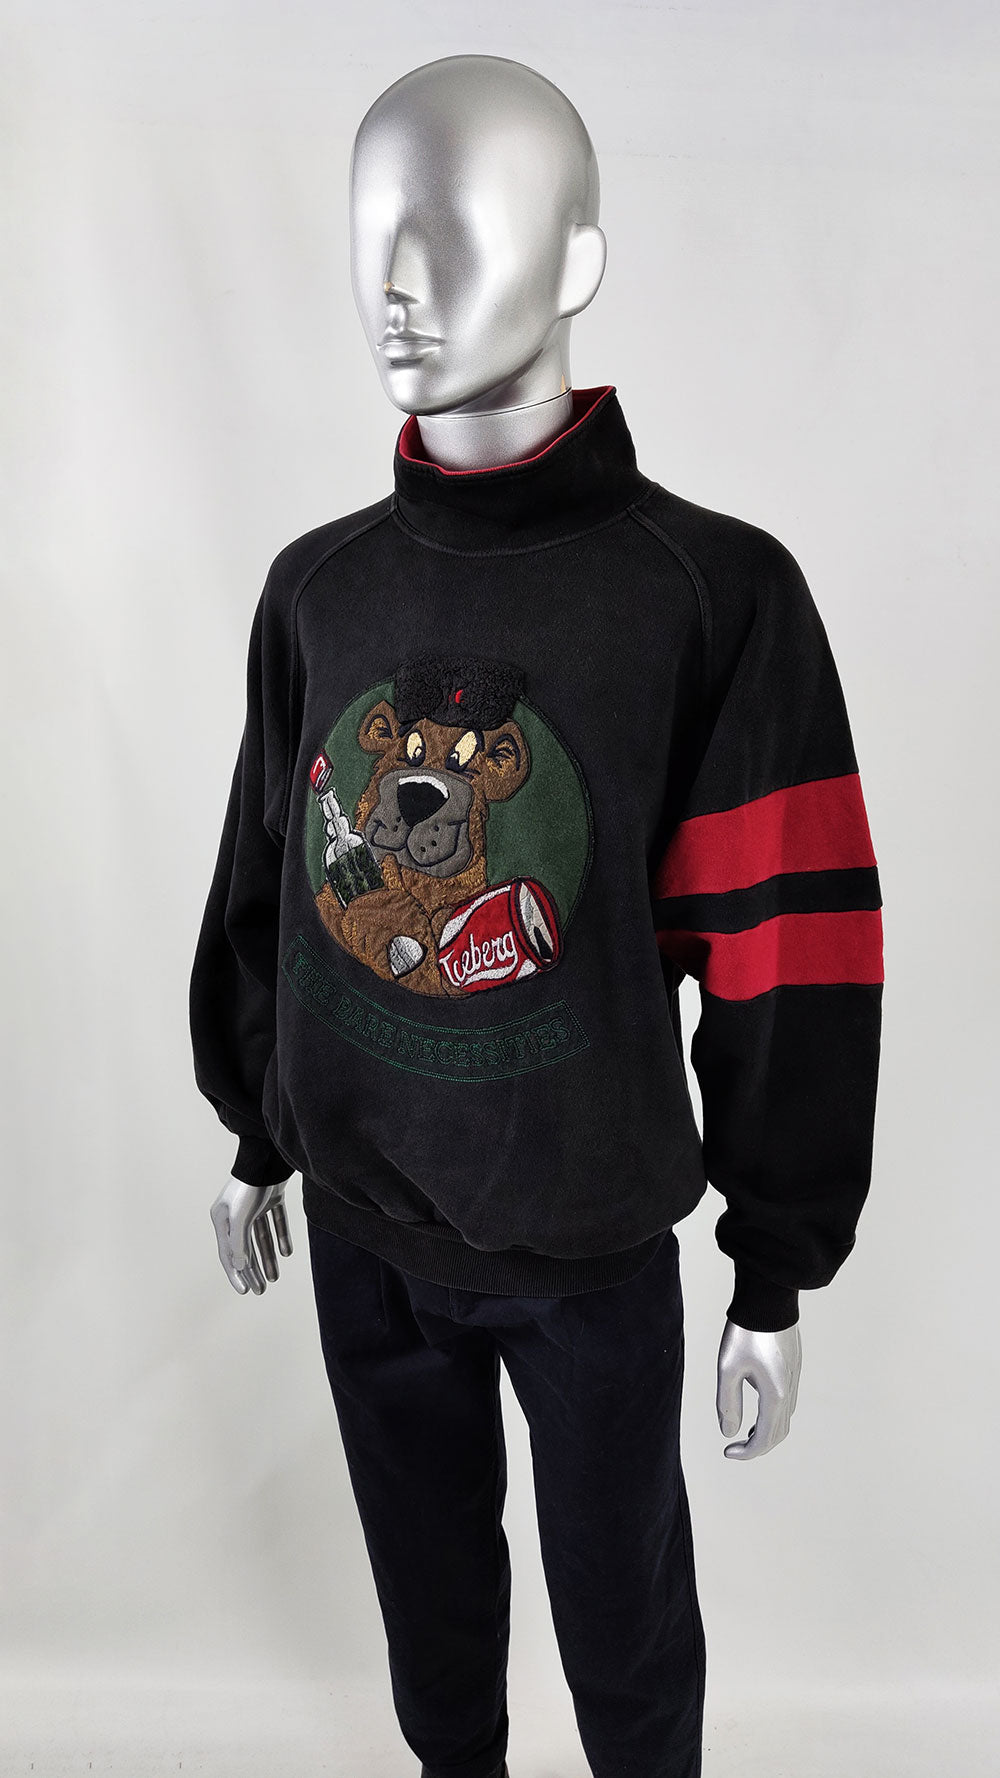 A vintage Iceberg sweatshirt for men from the 90s in a black cotton with a bear on the front.